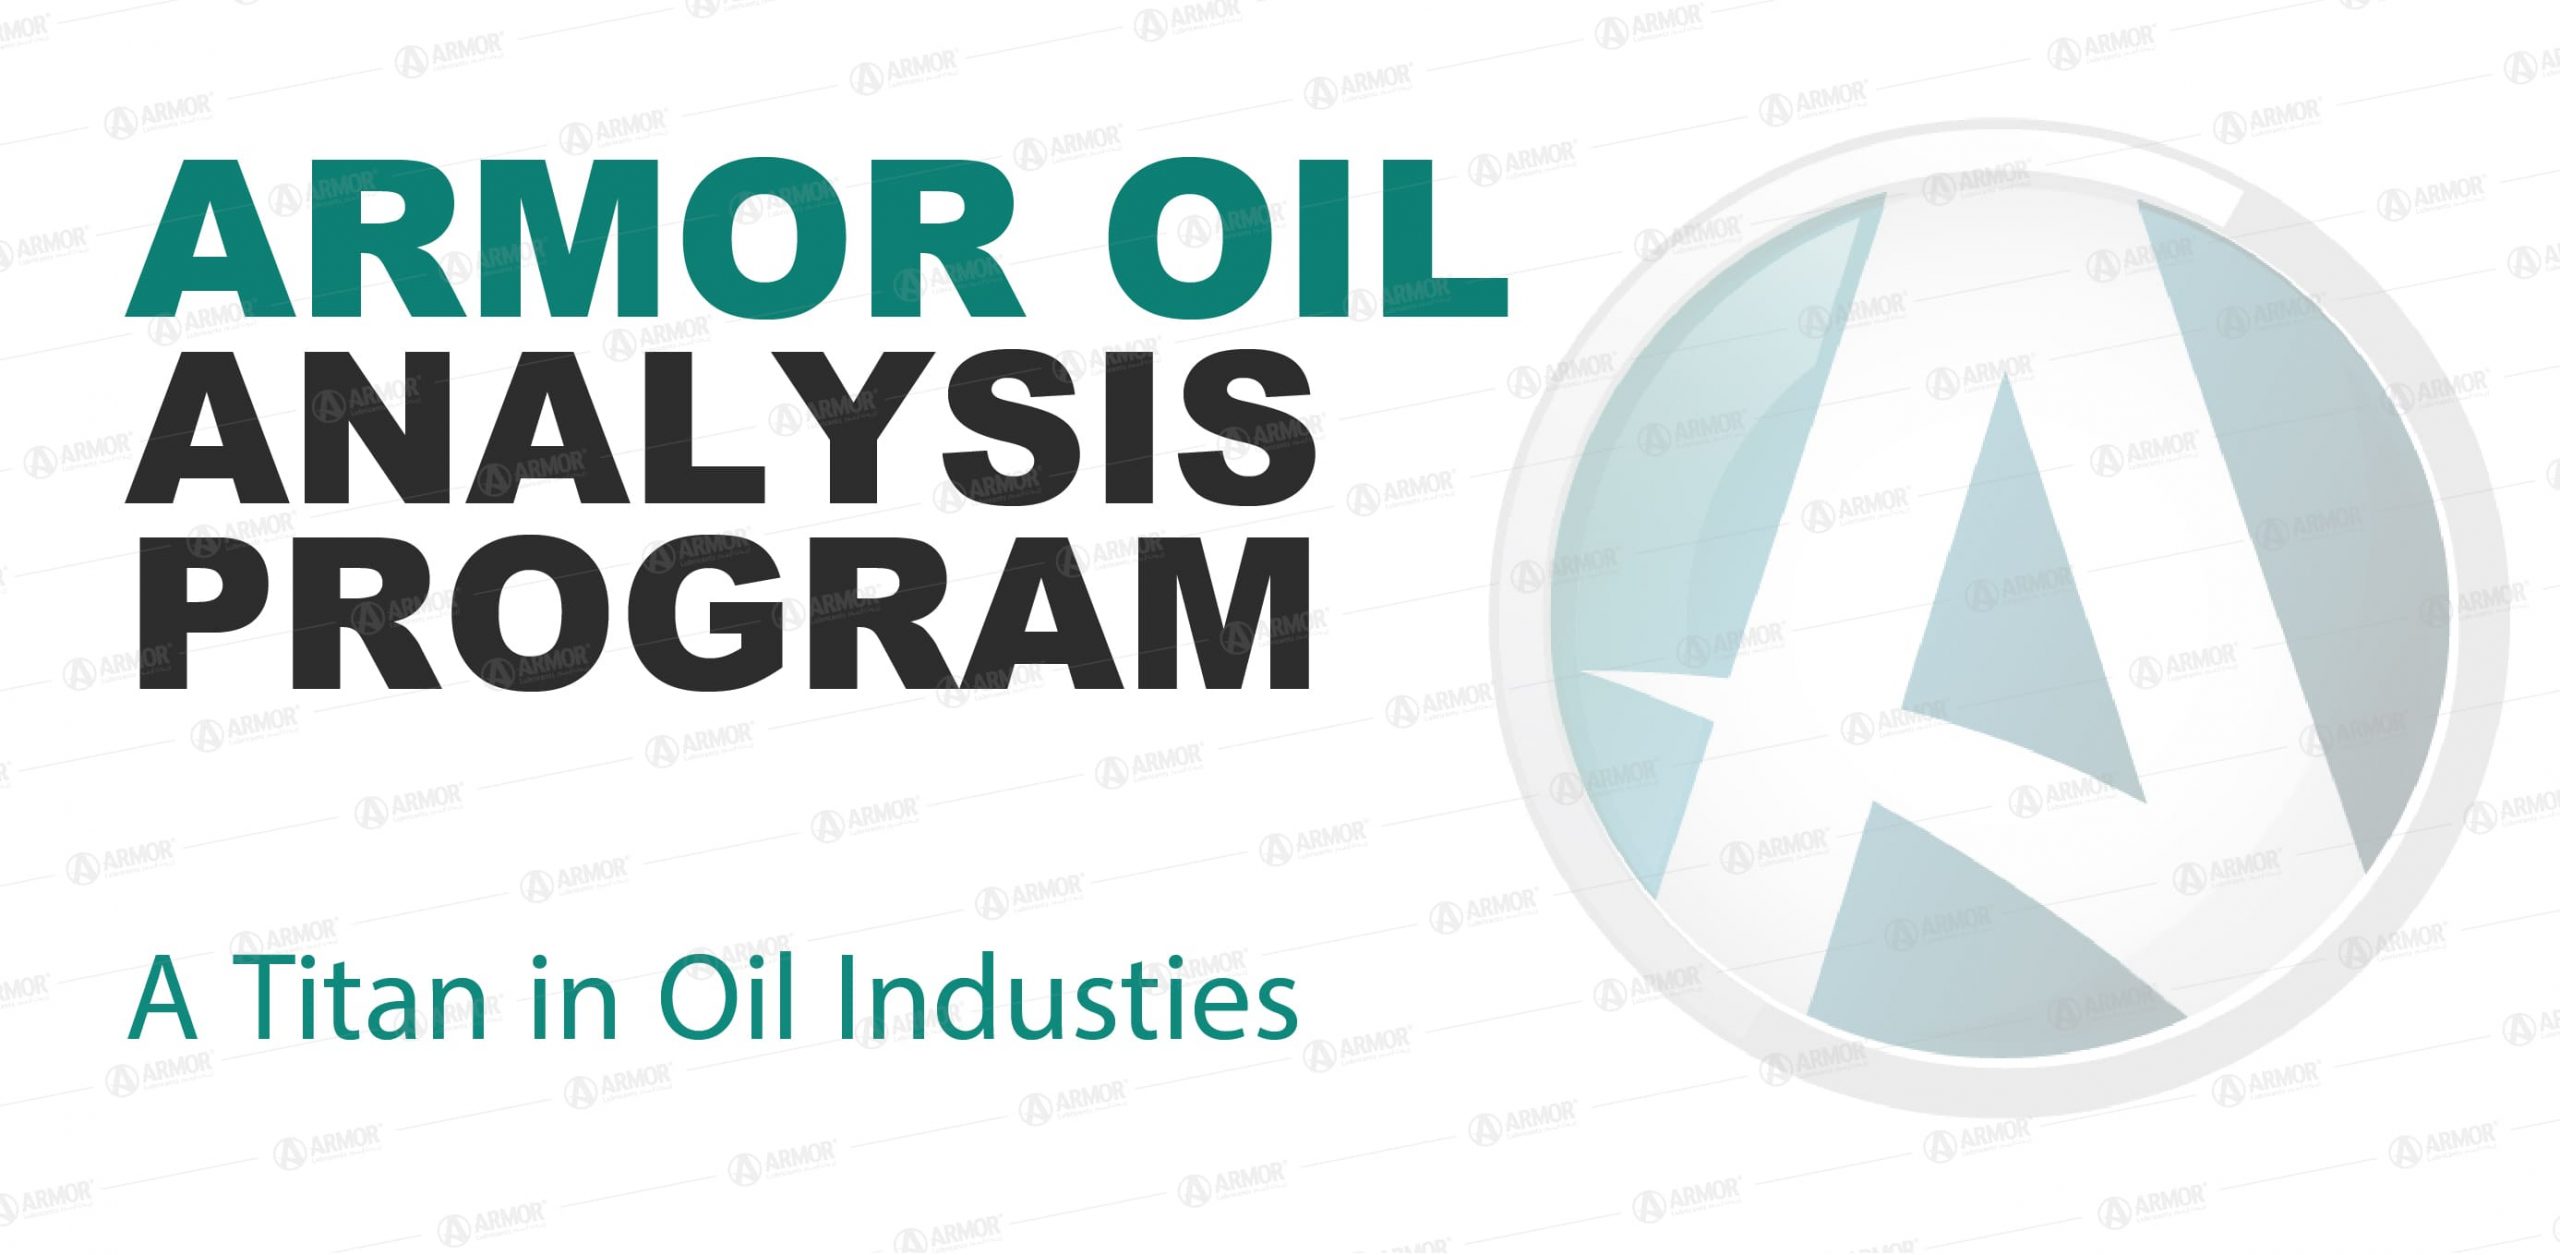 ARMOR Oil Analysis Program is Integral to any Successful Lubricant Reliability Program